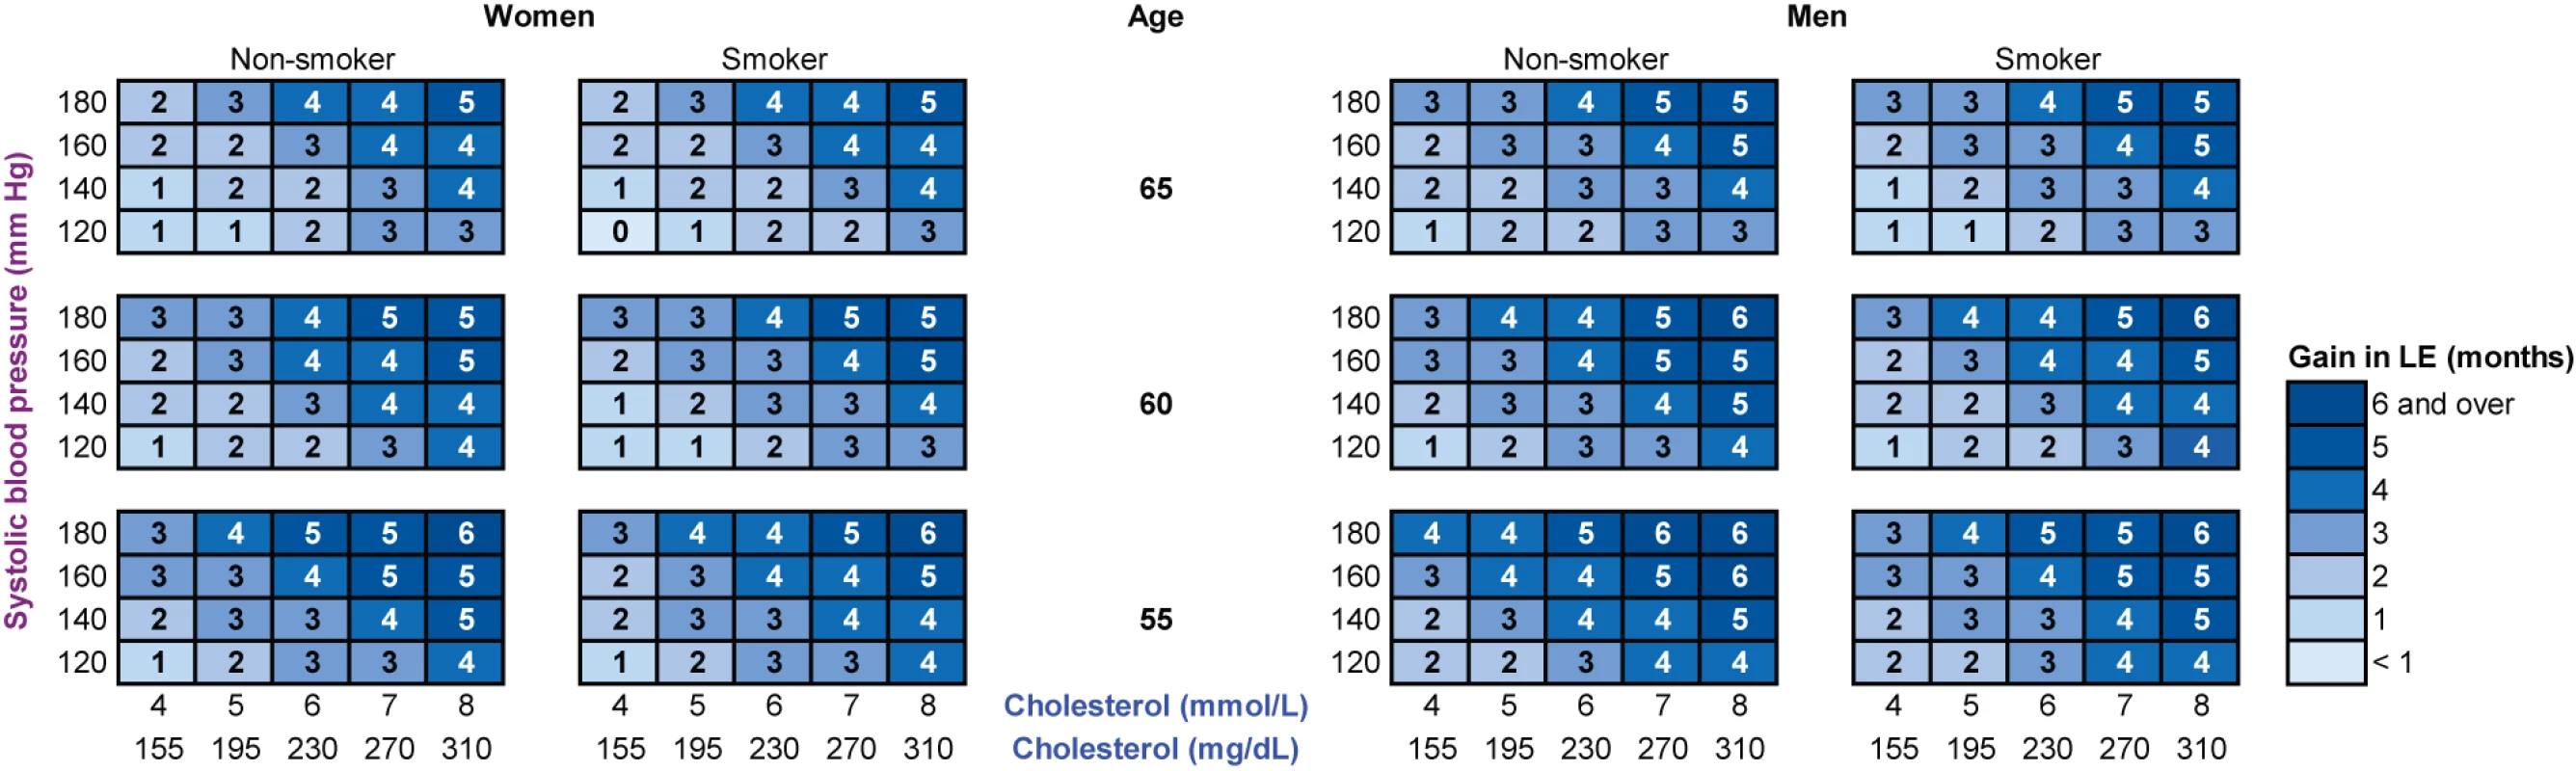 The gain in life expectancy (in months) with statin therapy, calculated with the RISC model.